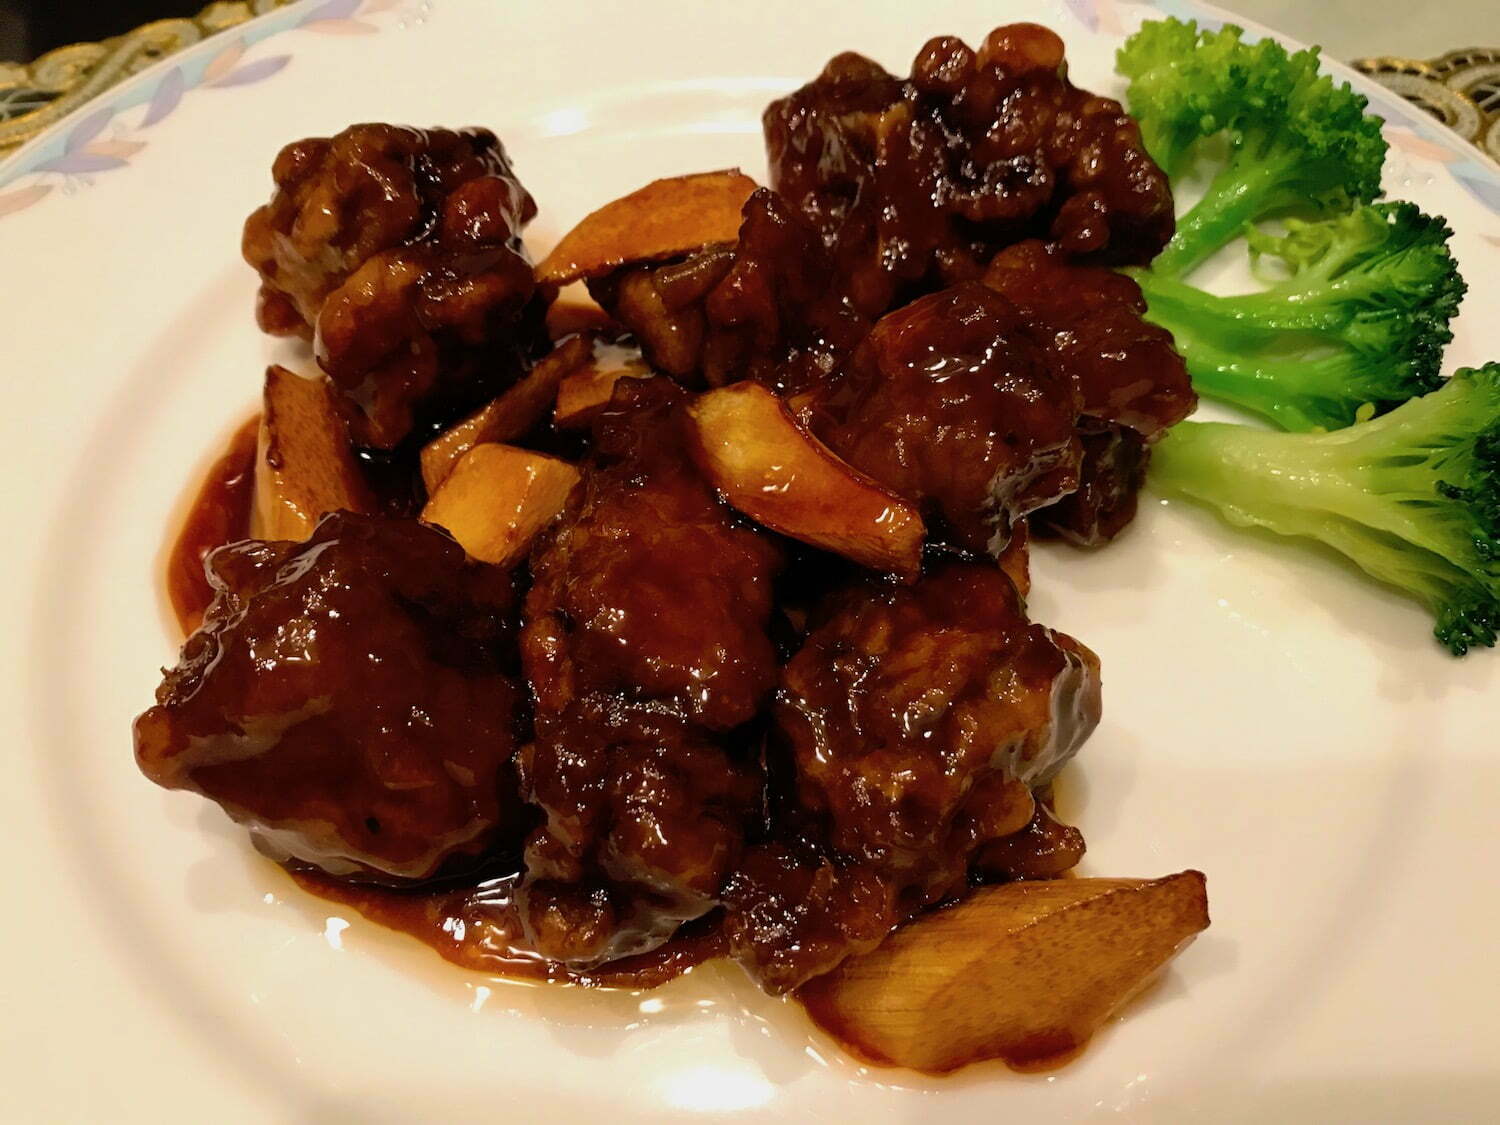 Fried spare ribs with black vinegar